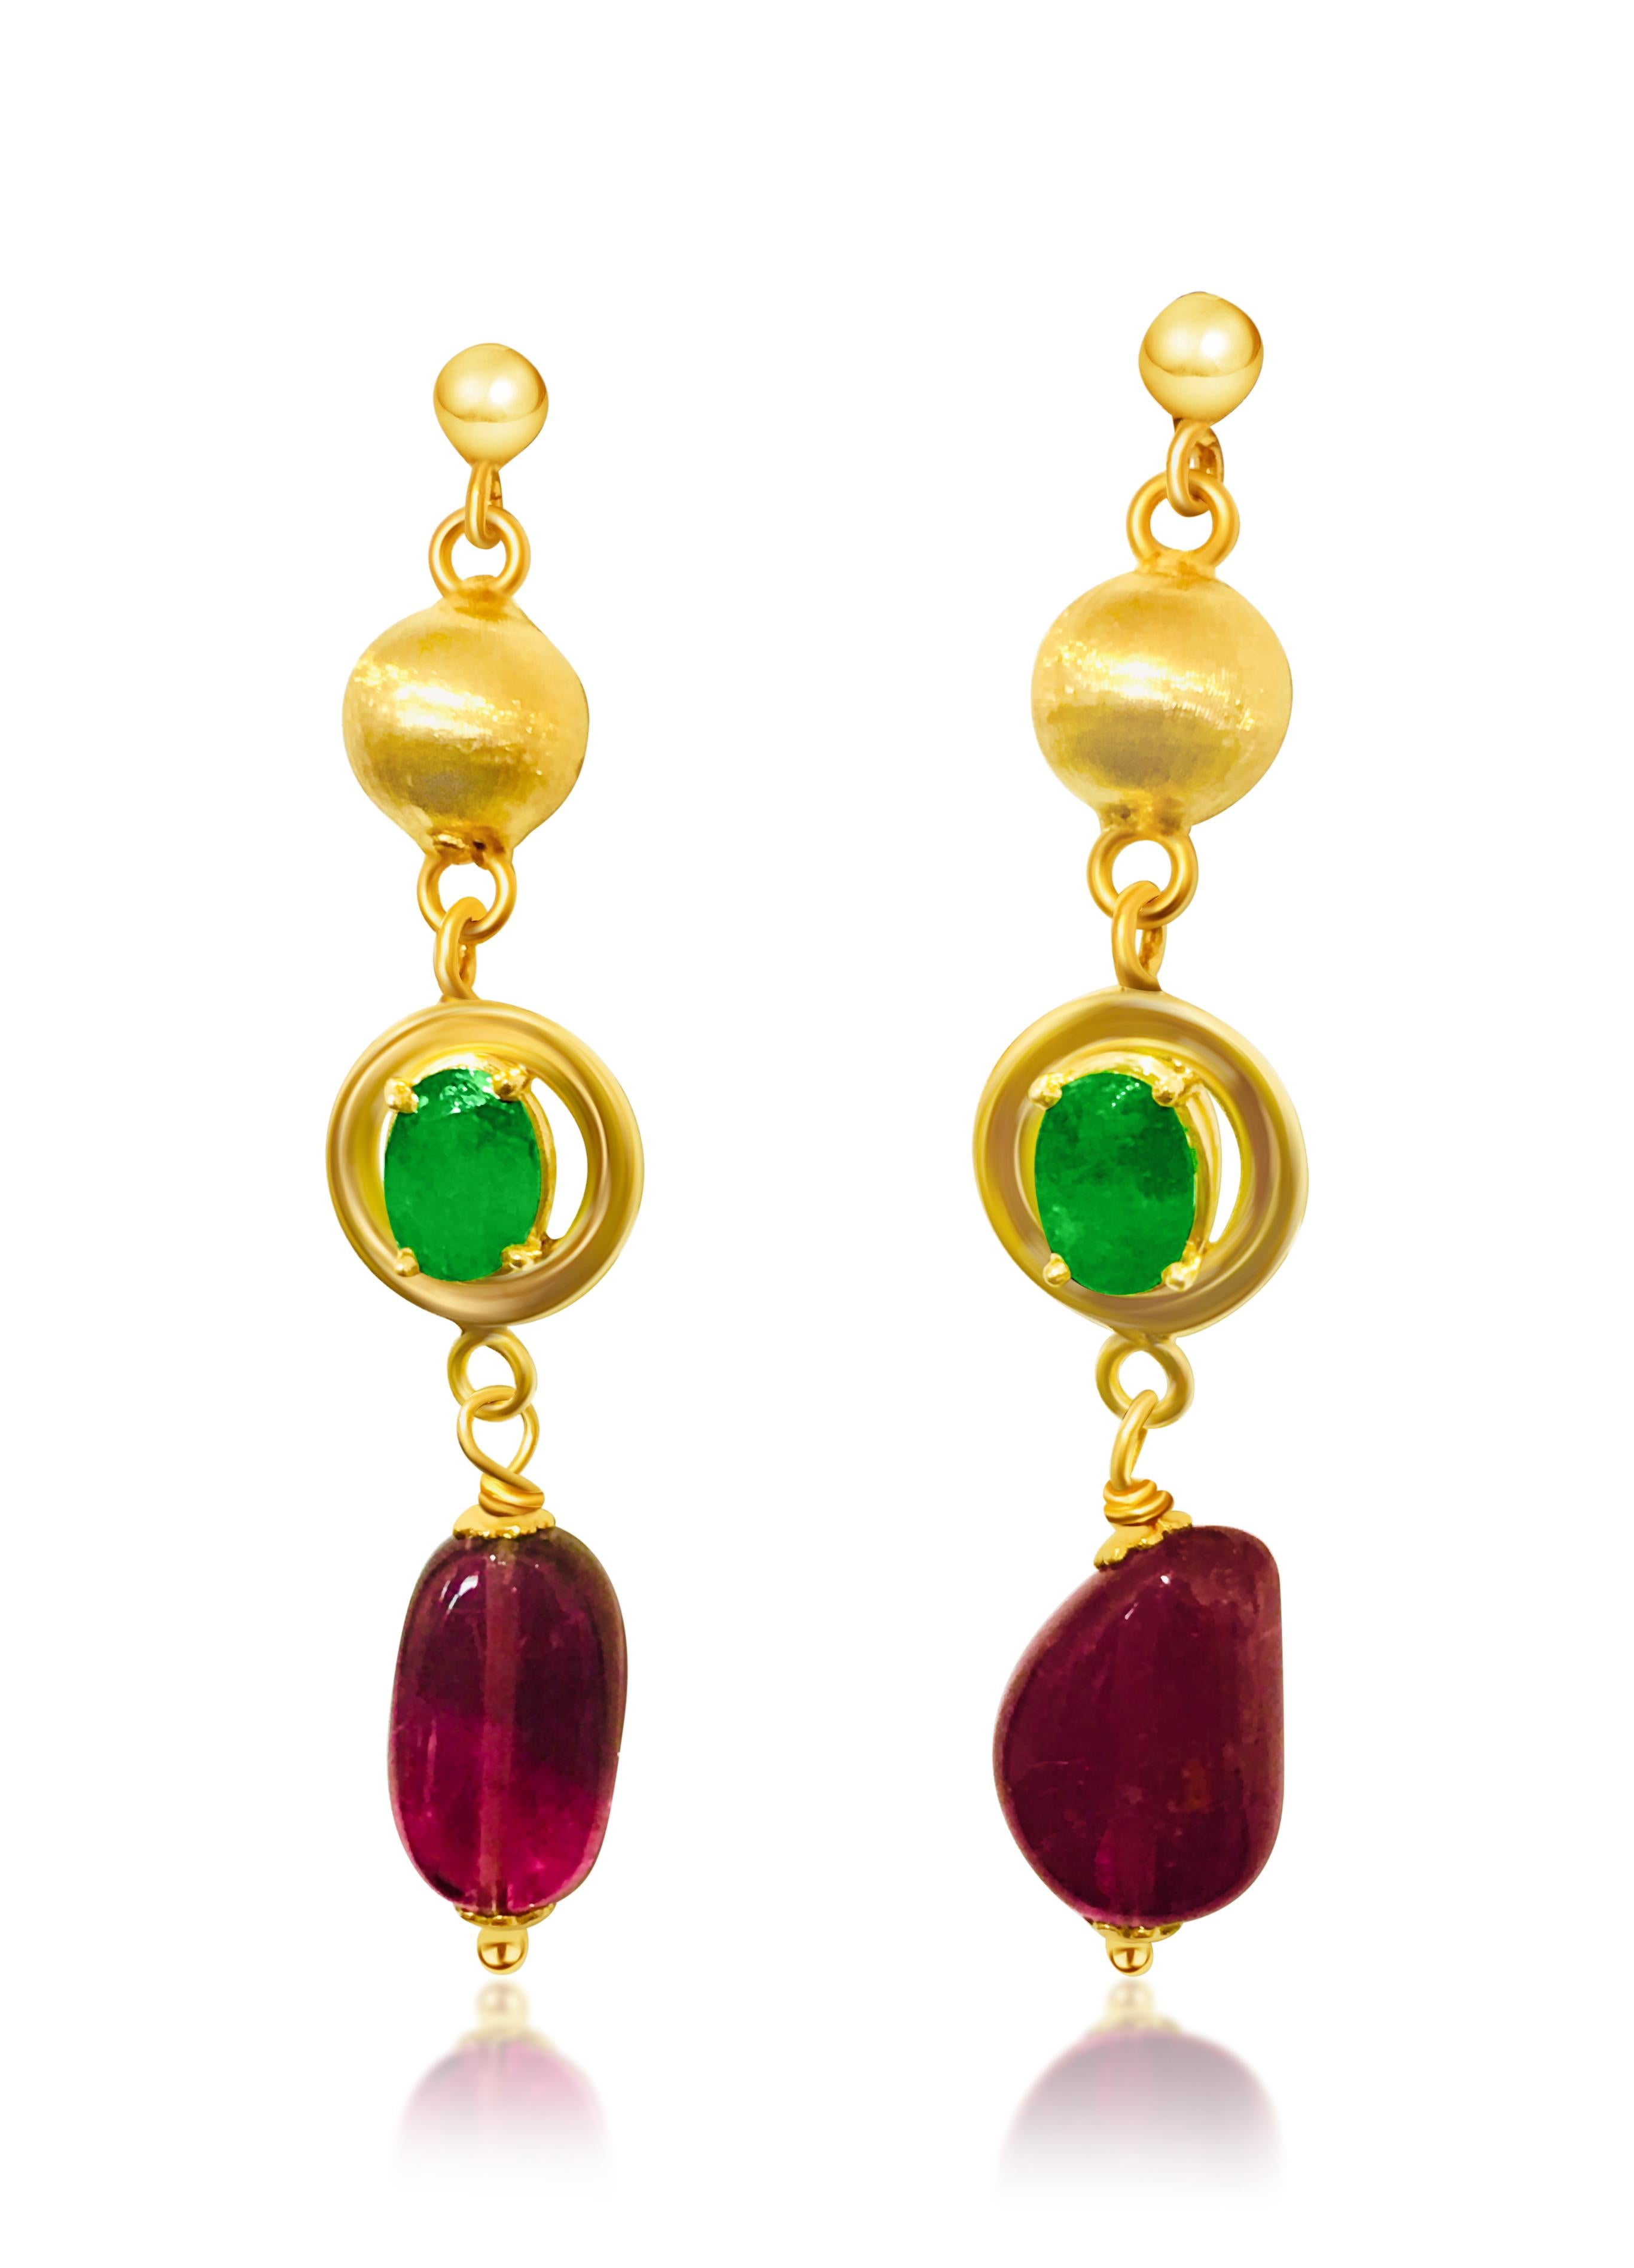 Metal: 14K yellow gold. 
TCW of emeralds: 1.50 carats, oval cut set in prongs. 100% natural earth mined emerald. Gorgeous Colombian emerald, superb color and luster. 

TCW of tourmaline: 8.00 carats. Fancy shape tourmaline. Natural earth mined